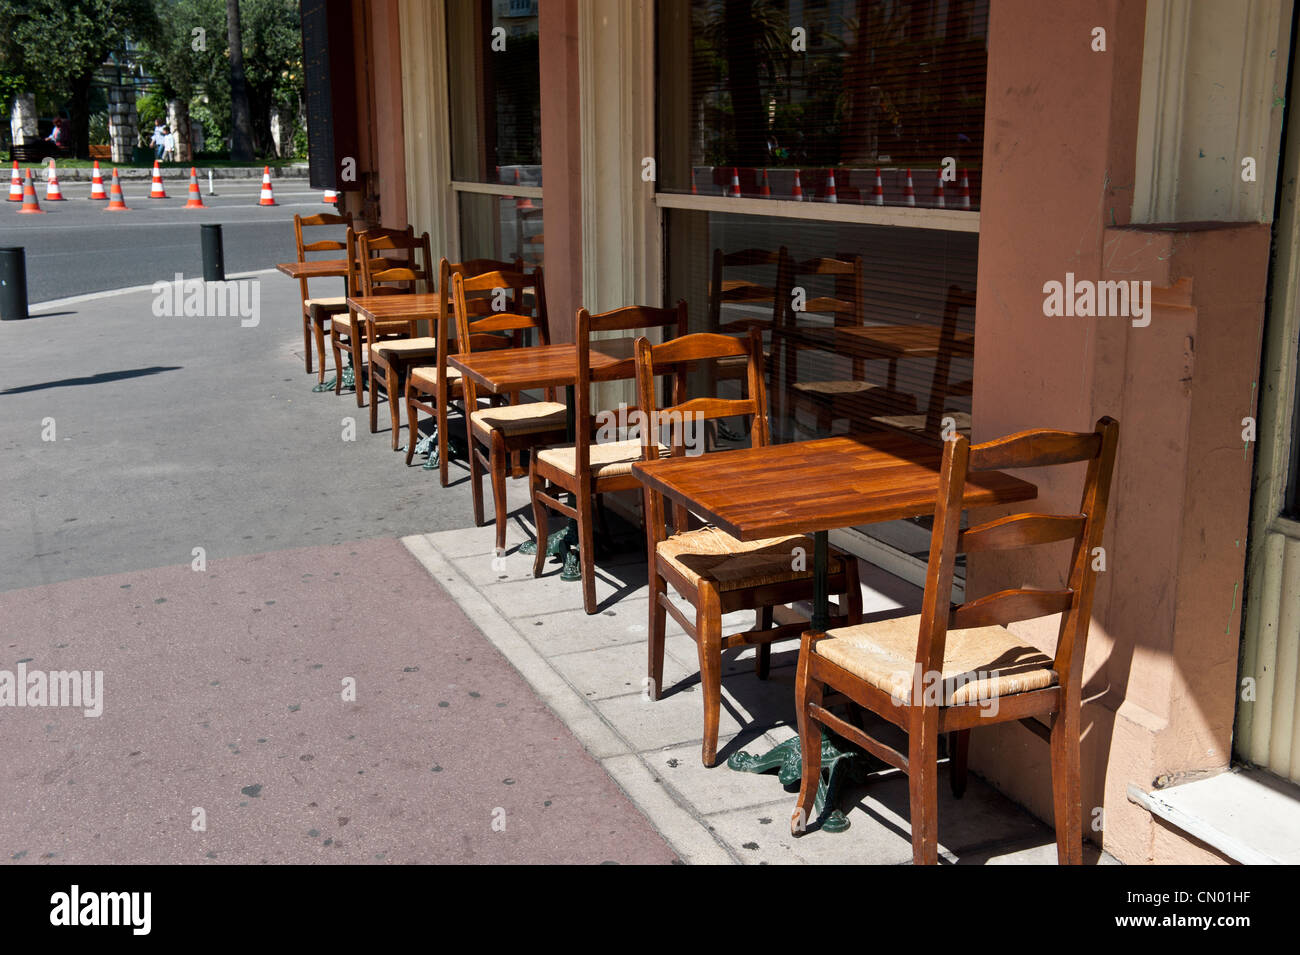 A column of wooden chair and table setups on a sidewalk. Stock Photo